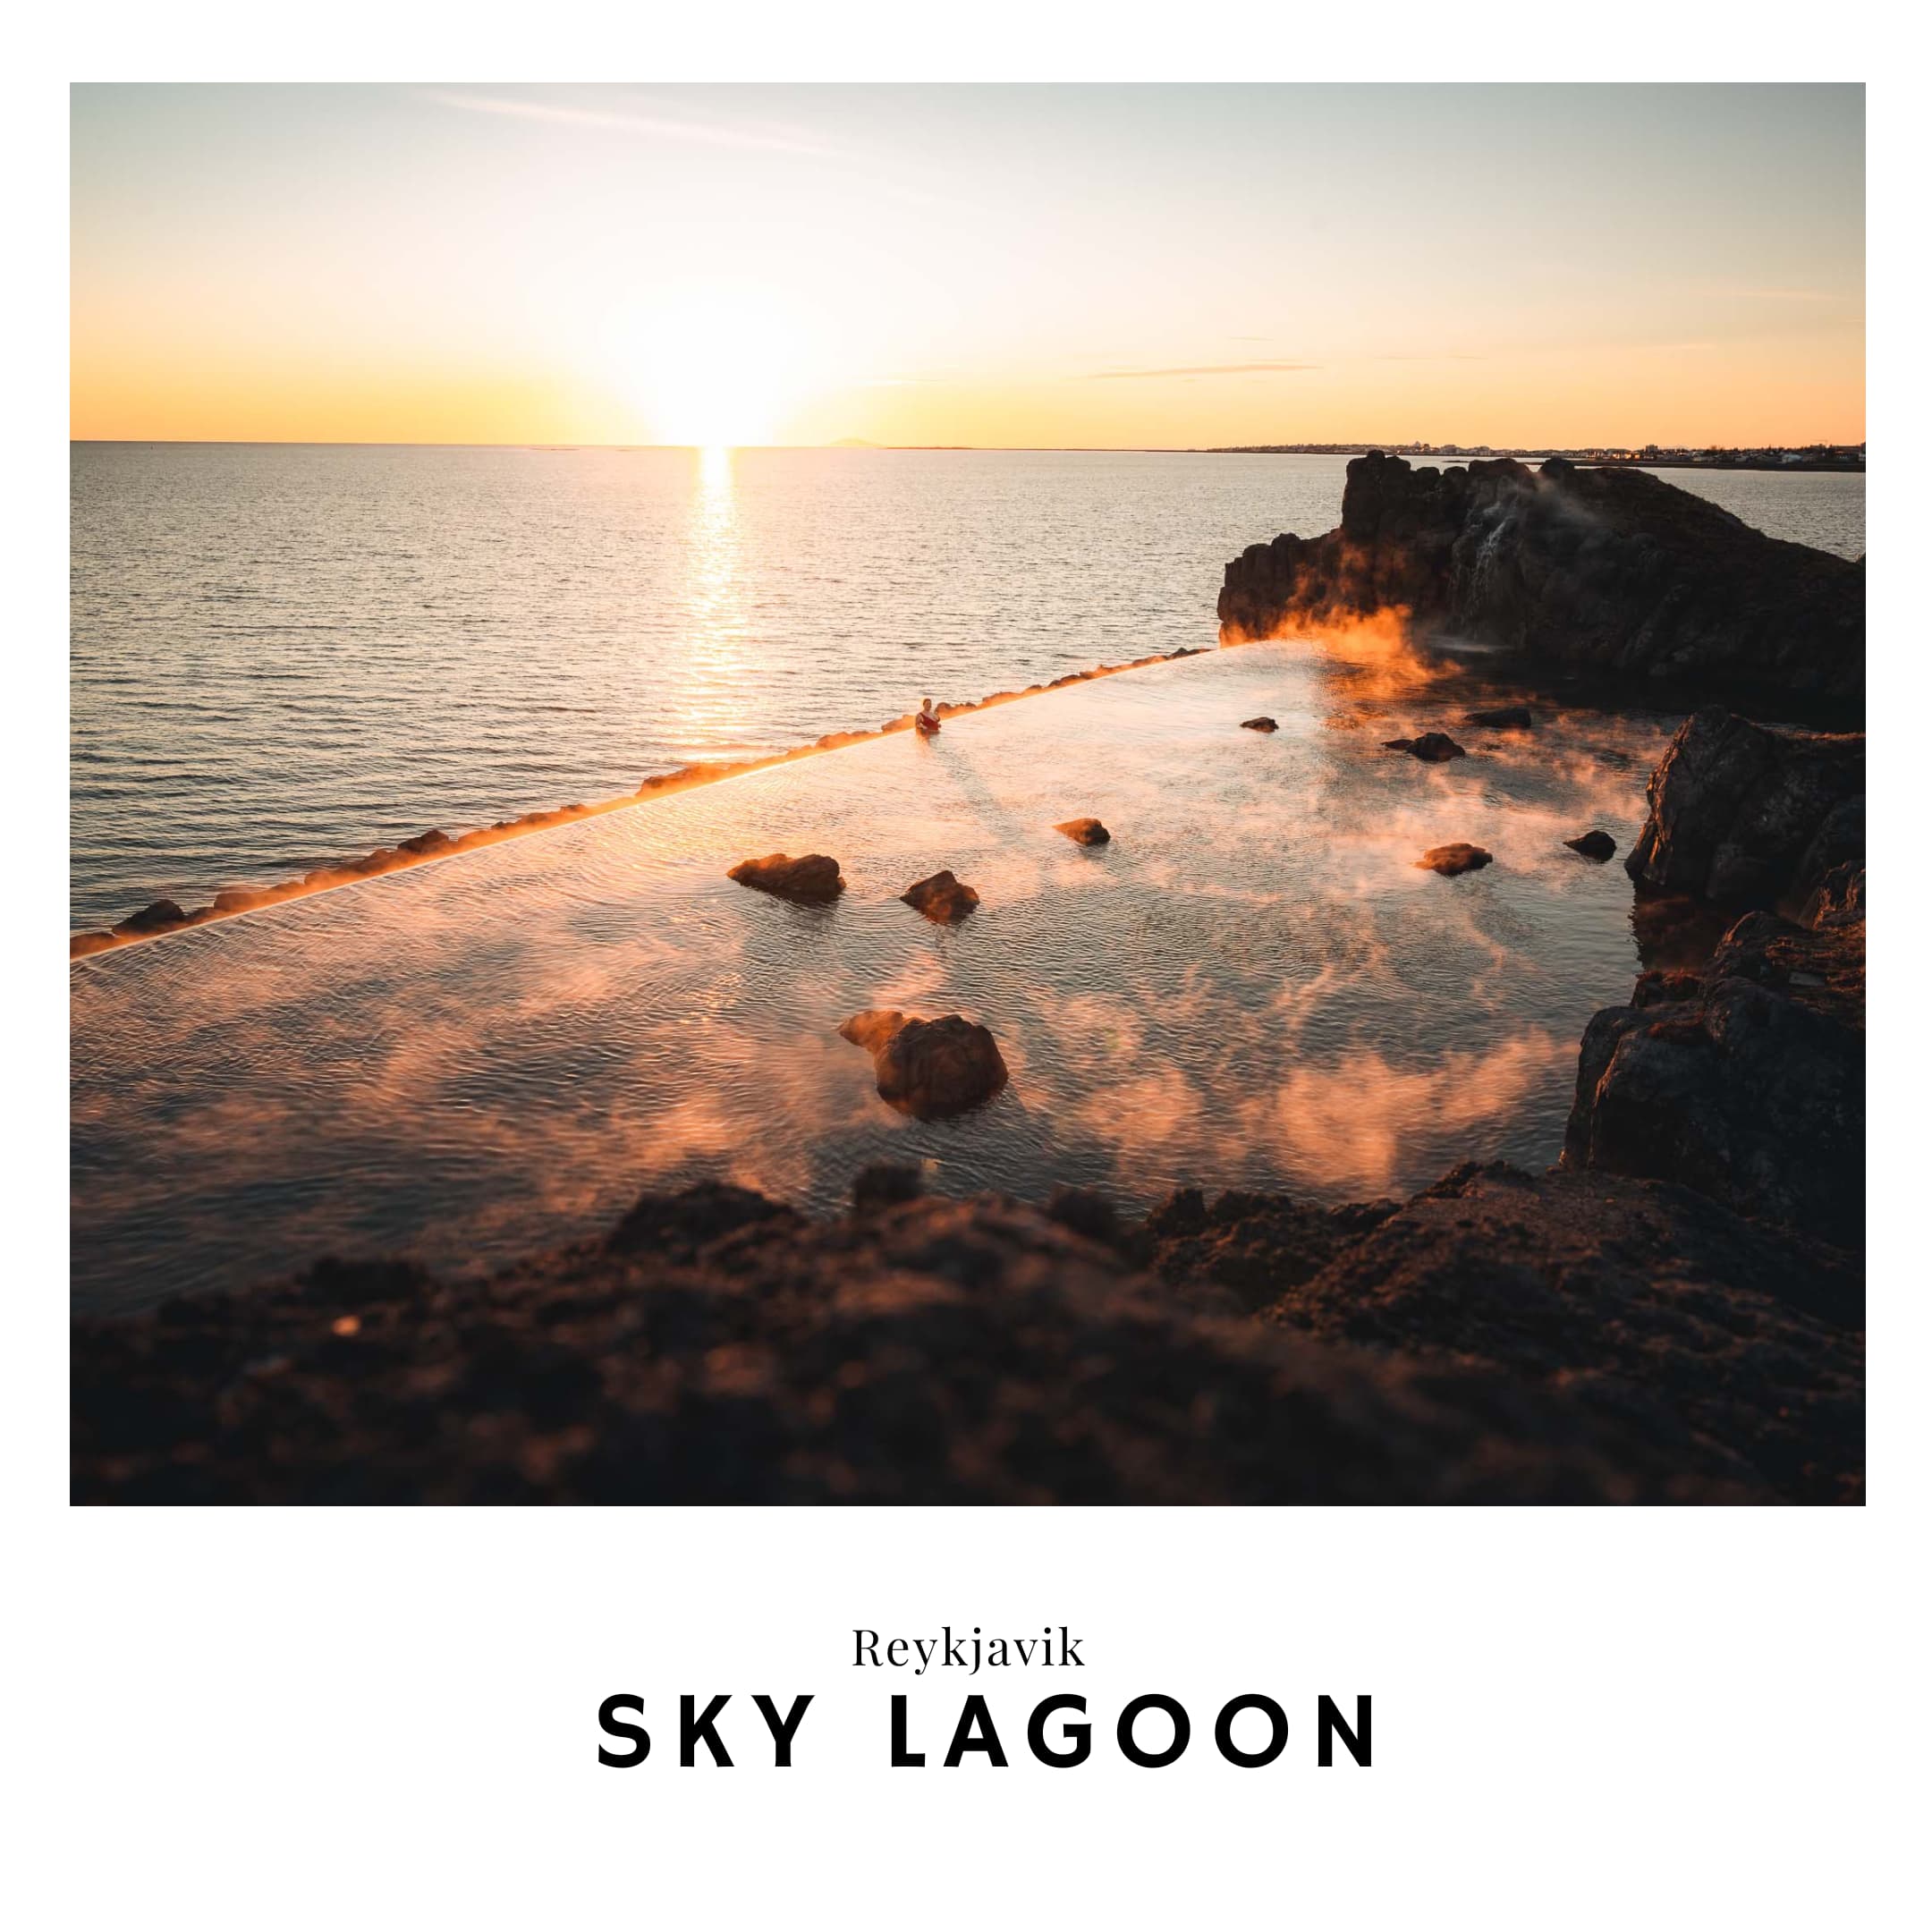 Link to the Sky Lagoon travel guide in Iceland Reykjavik